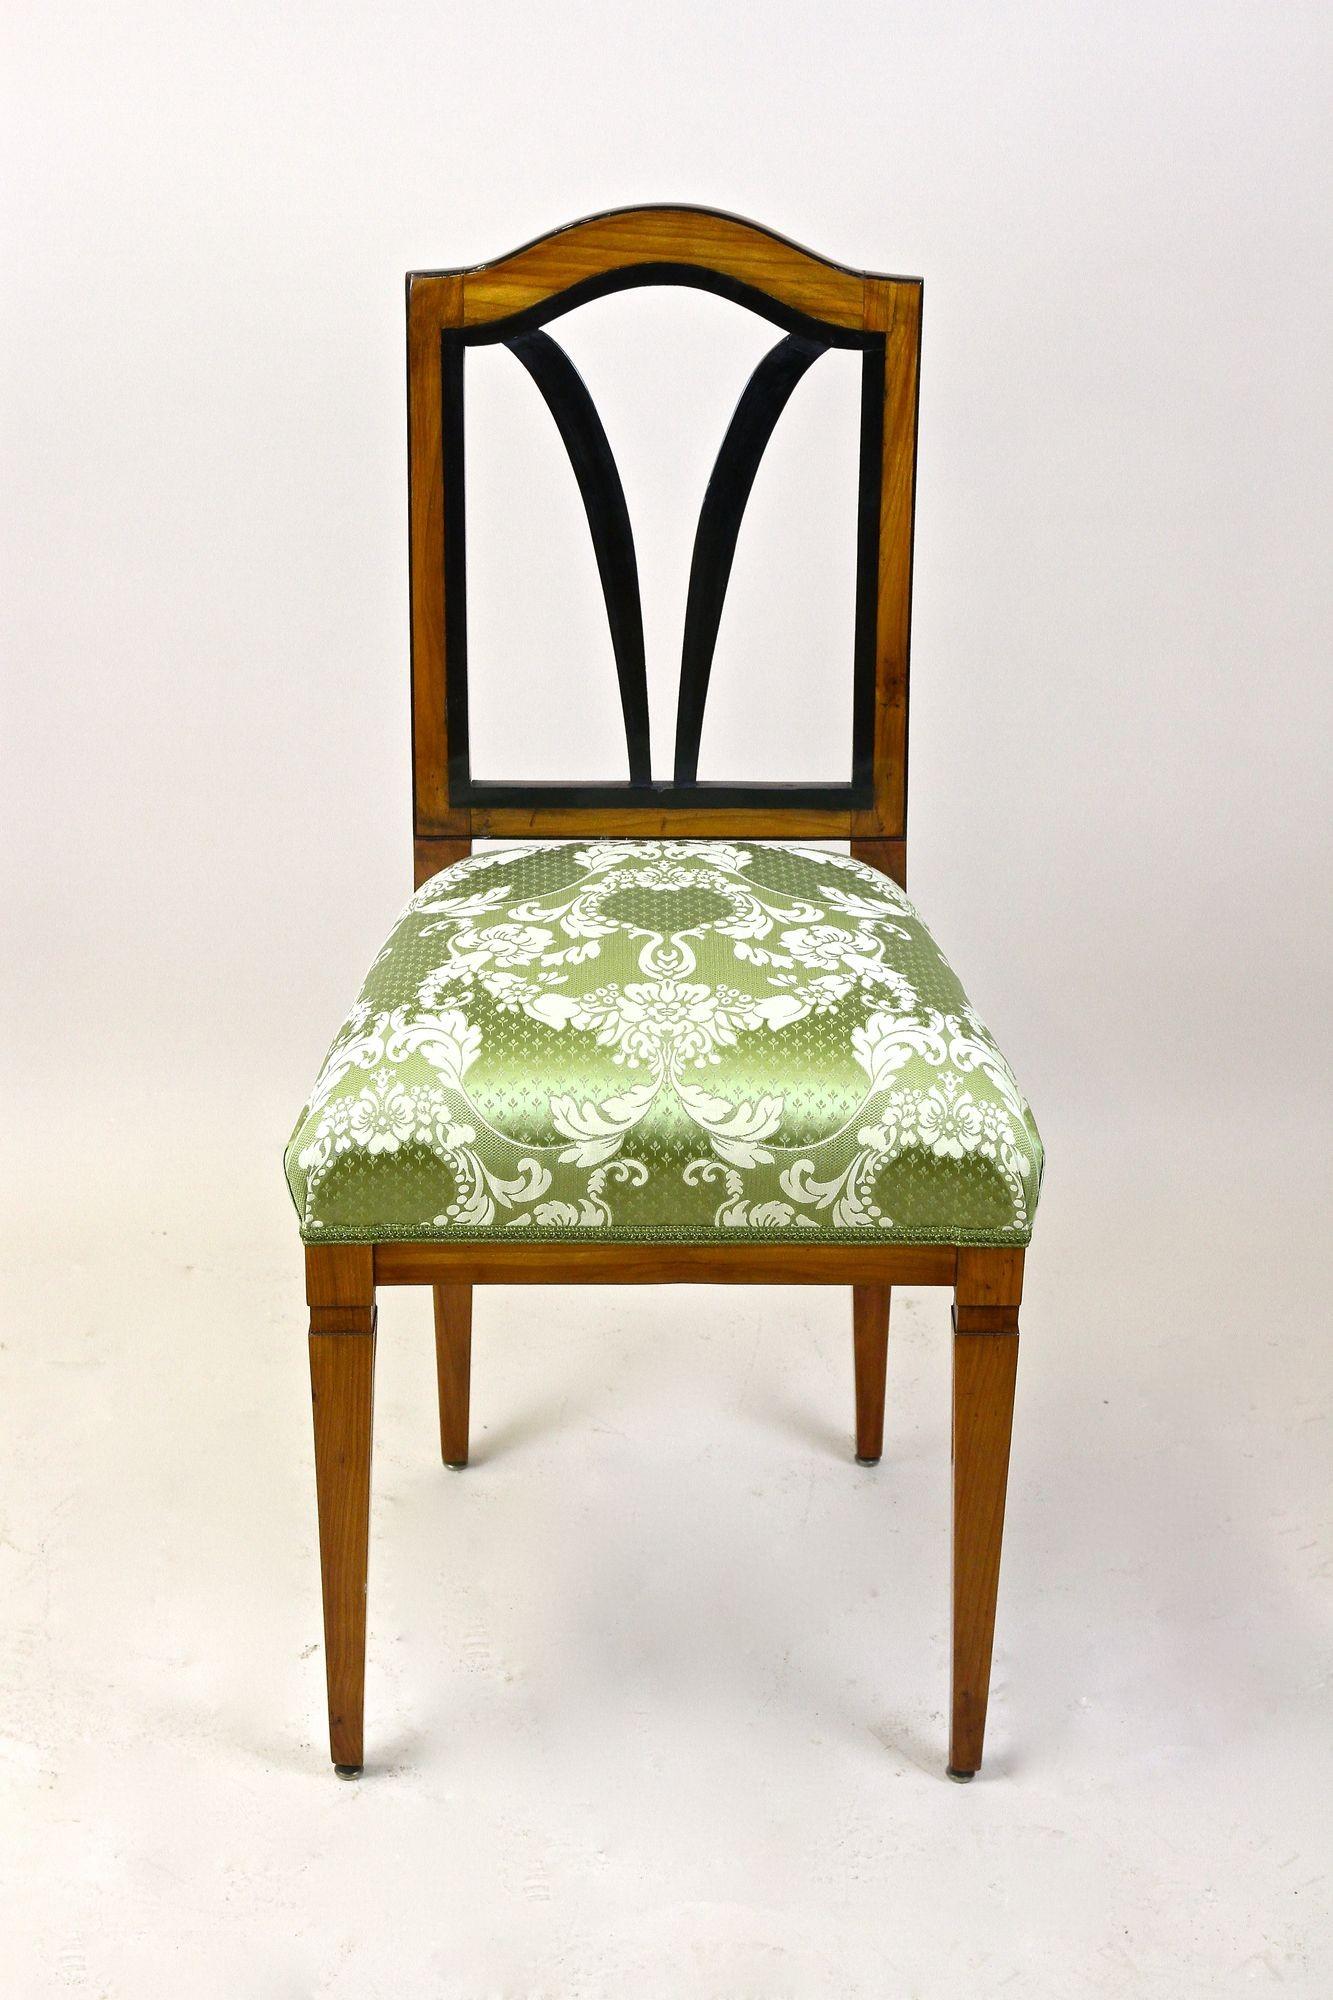 Unique 18th century cherrywood side chair from the period of emperor Joseph II. of Austria, the son of empress Maria Theresia, around 1790. Made of solid cherrywood, this decorative antique chair has been newly upholstered during the restoration